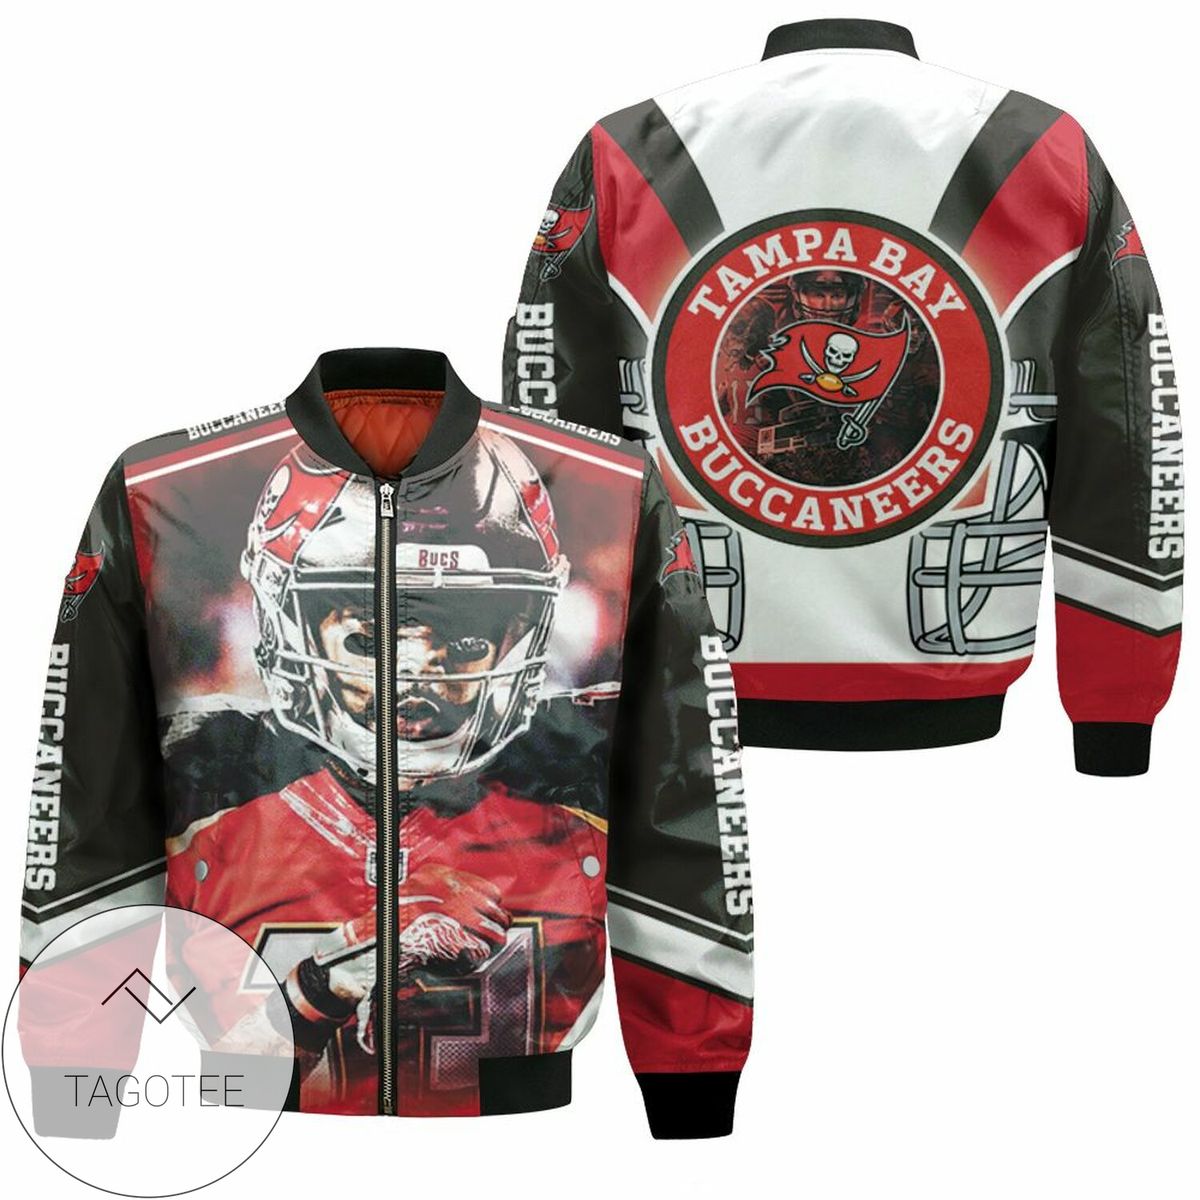 Mike Evans #13 Tampa Bay Buccaneers Nfc South Division Champions Super Bowl 2021 Bomber Jacket